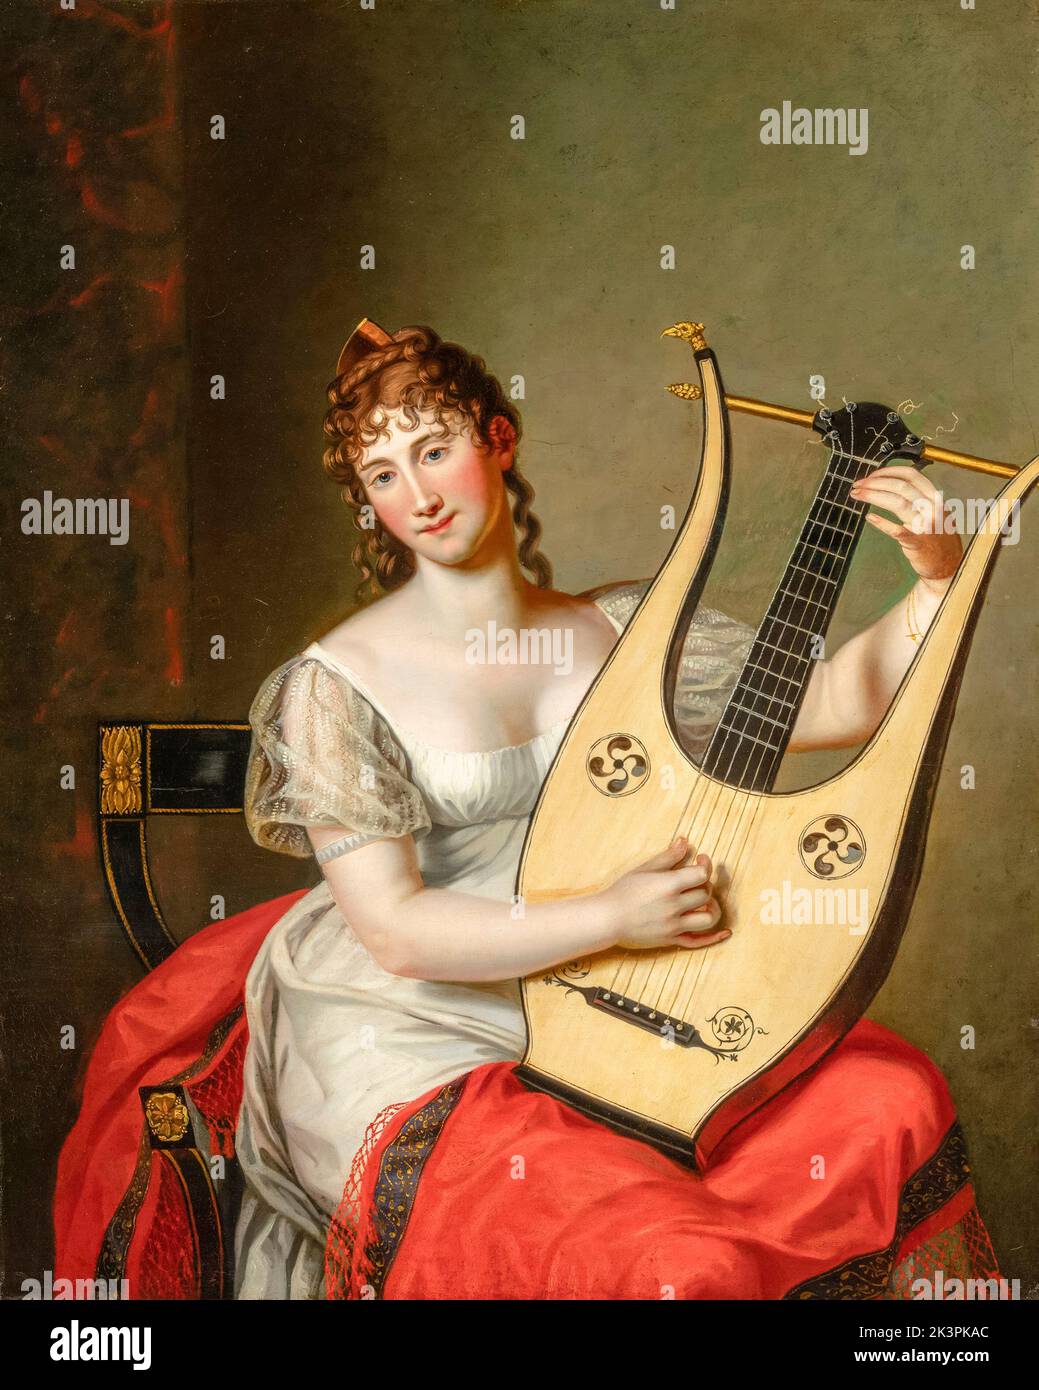 Frederica of Mecklenburg-Strelitz (1778-1841), Duchess of Cumberland & Teviotdale (1815-1841), Queen Consort of Hanover (1837-1841), playing a Lyre, portrait painting in oil on canvas by Friedrich Carl Gröger, before 1838 Stock Photo